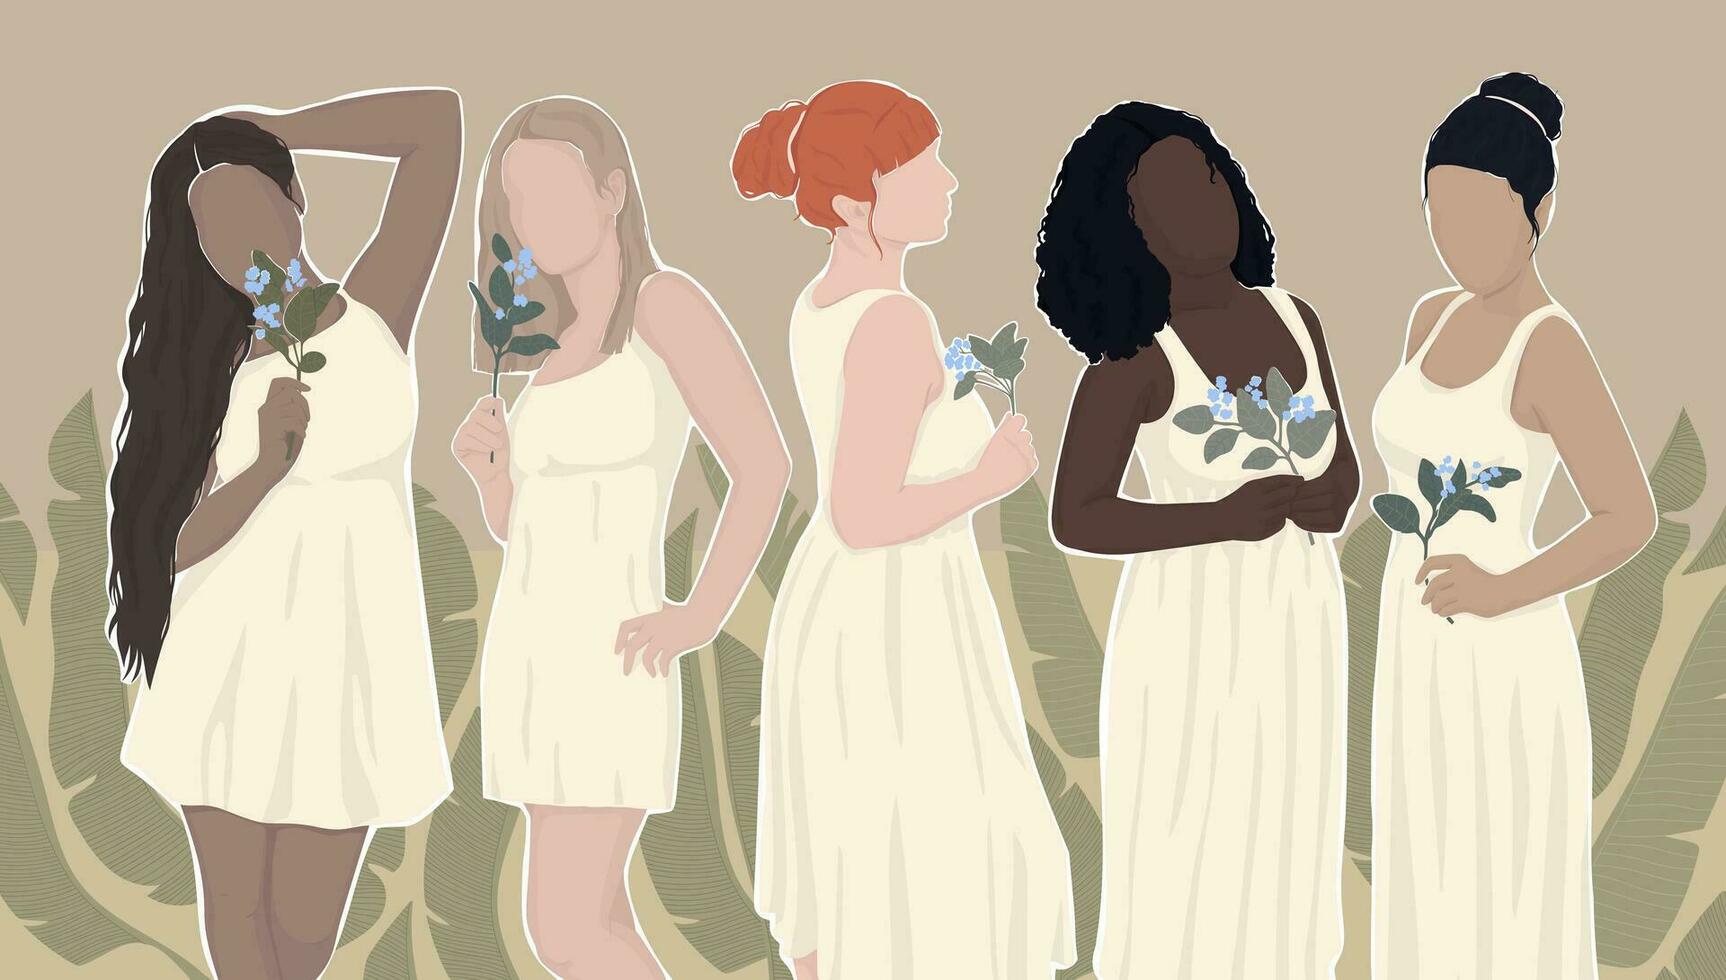 set of drawn women from different ethnic groups in white dresses hold flowers in their hands. vector modern flat illustration. isolated in layers. for postcard, poster, banner, magazine cover